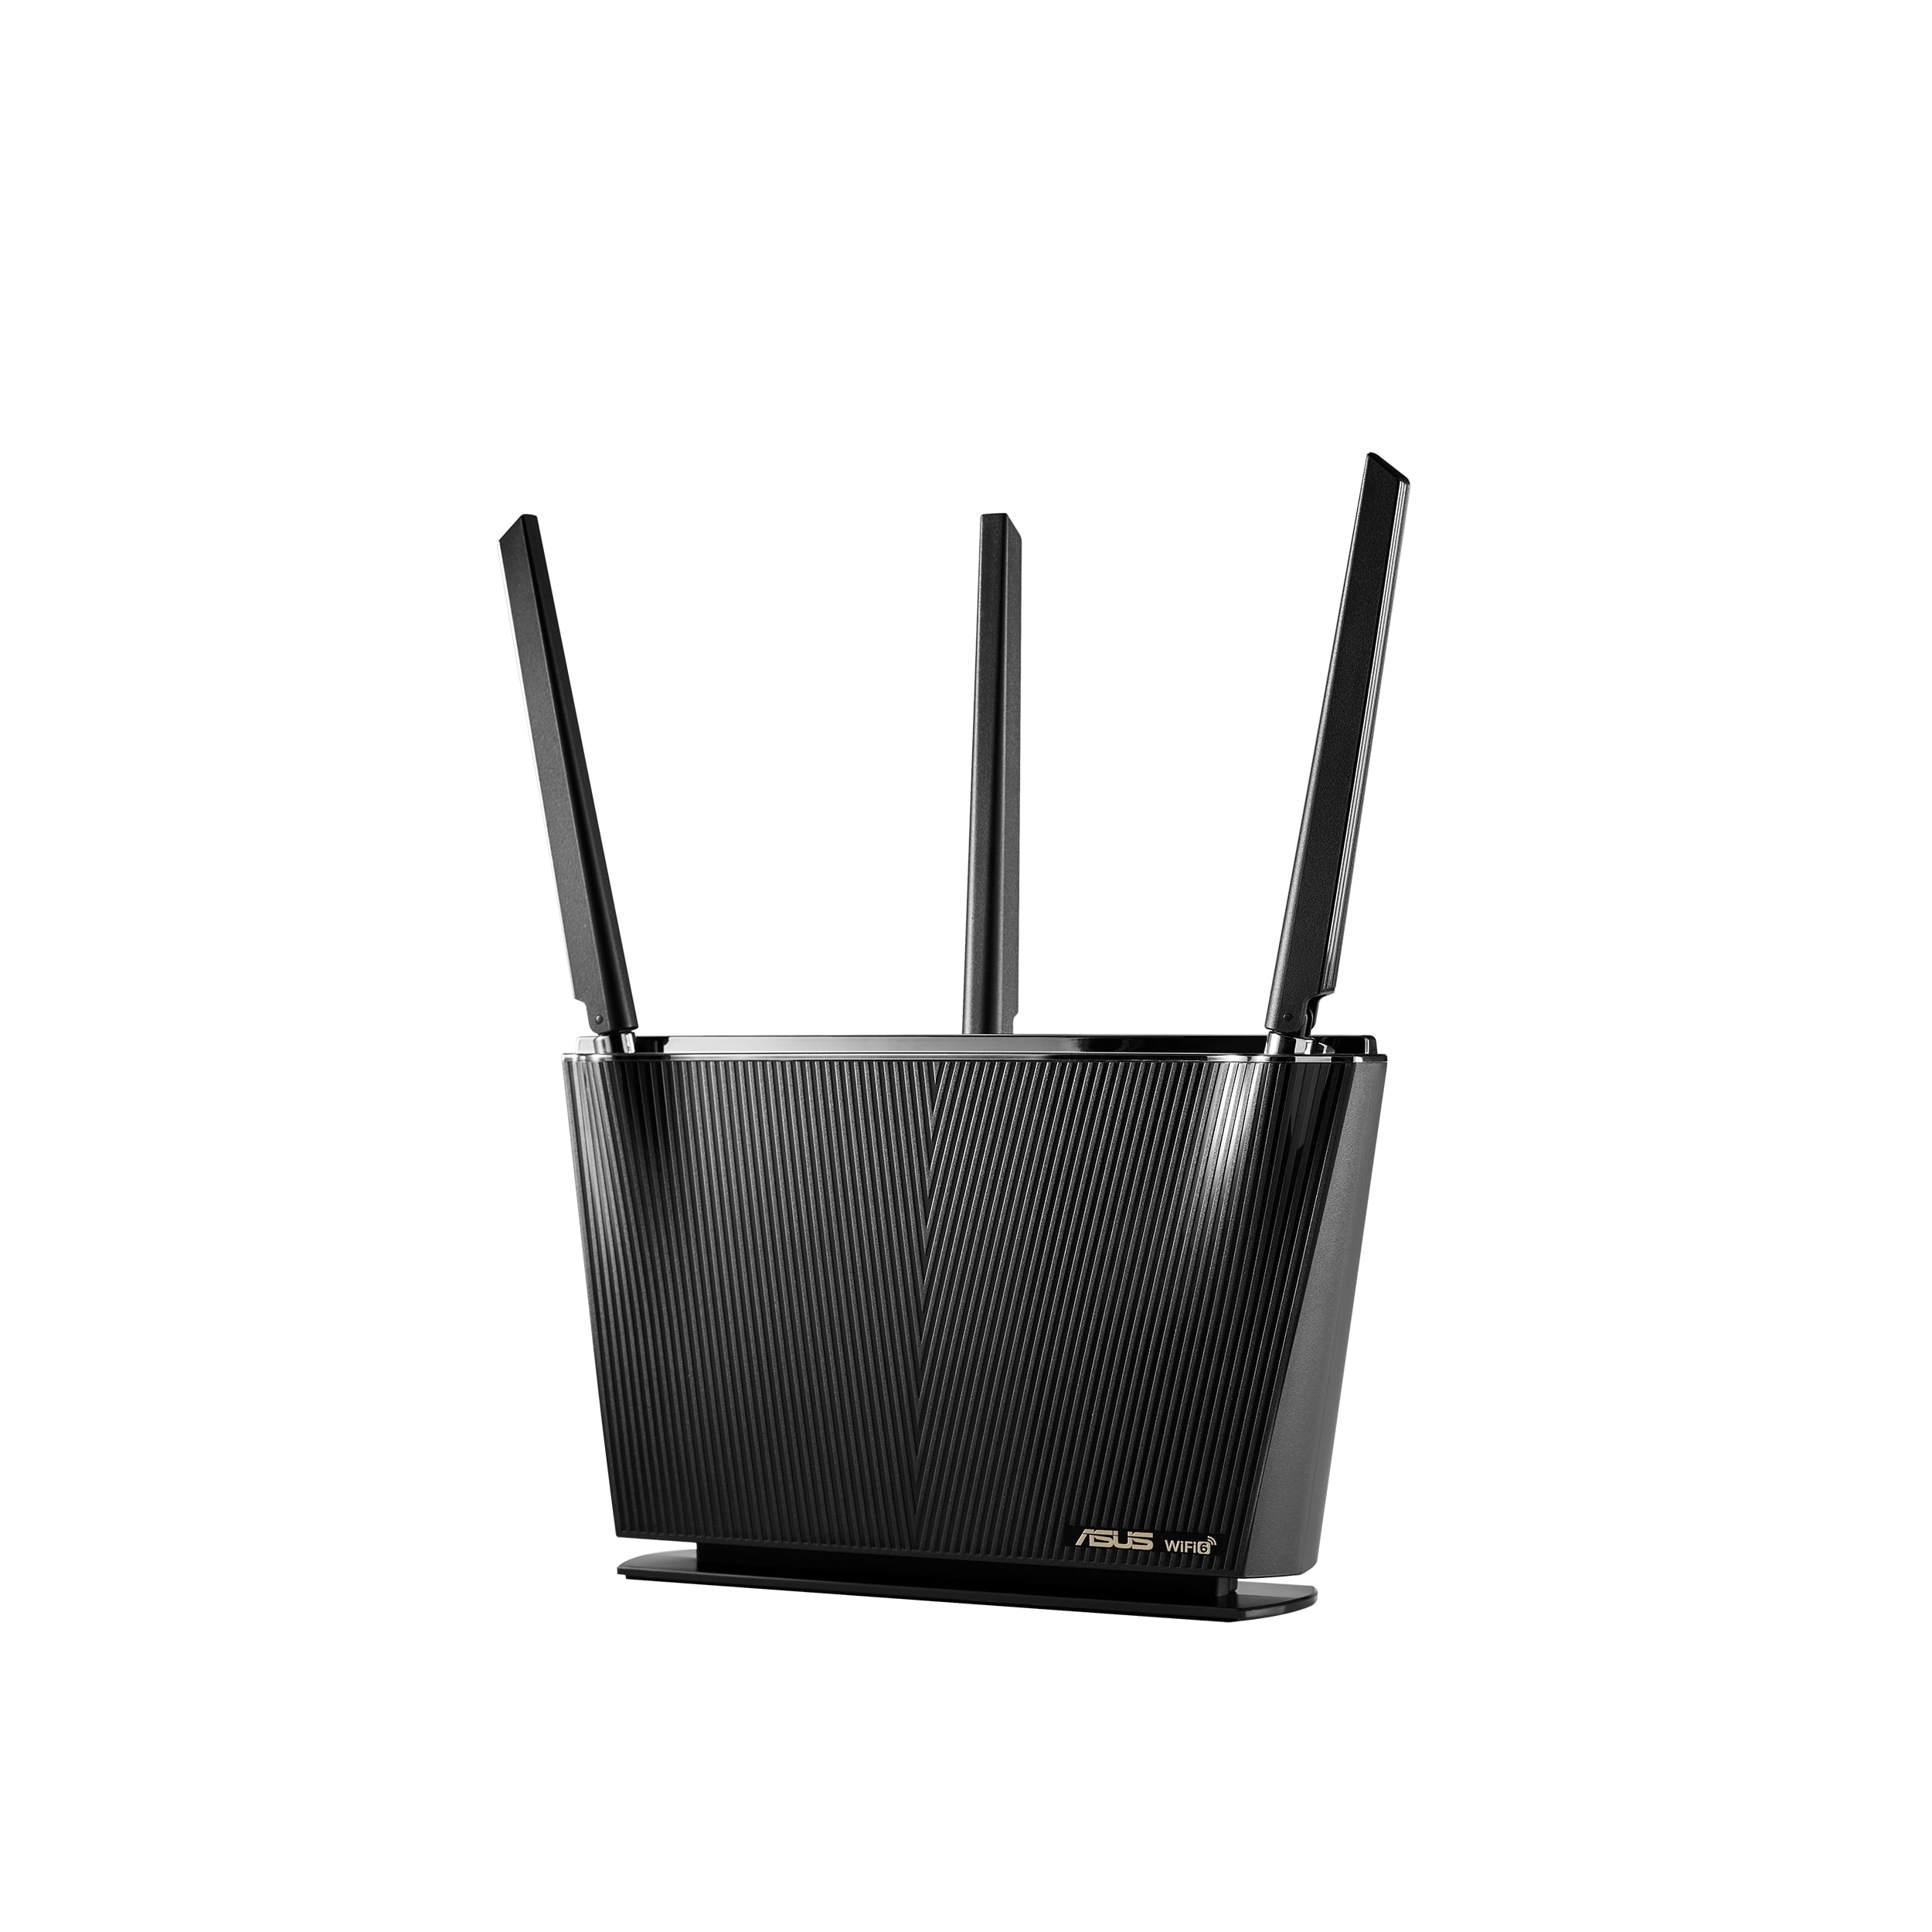 Misvisende Blikkenslager seng ASUS AX2700 WiFi 6 Router (RT-AX68U) - Dual Band 3x3 Wireless Internet  Router wi - Walmart.com